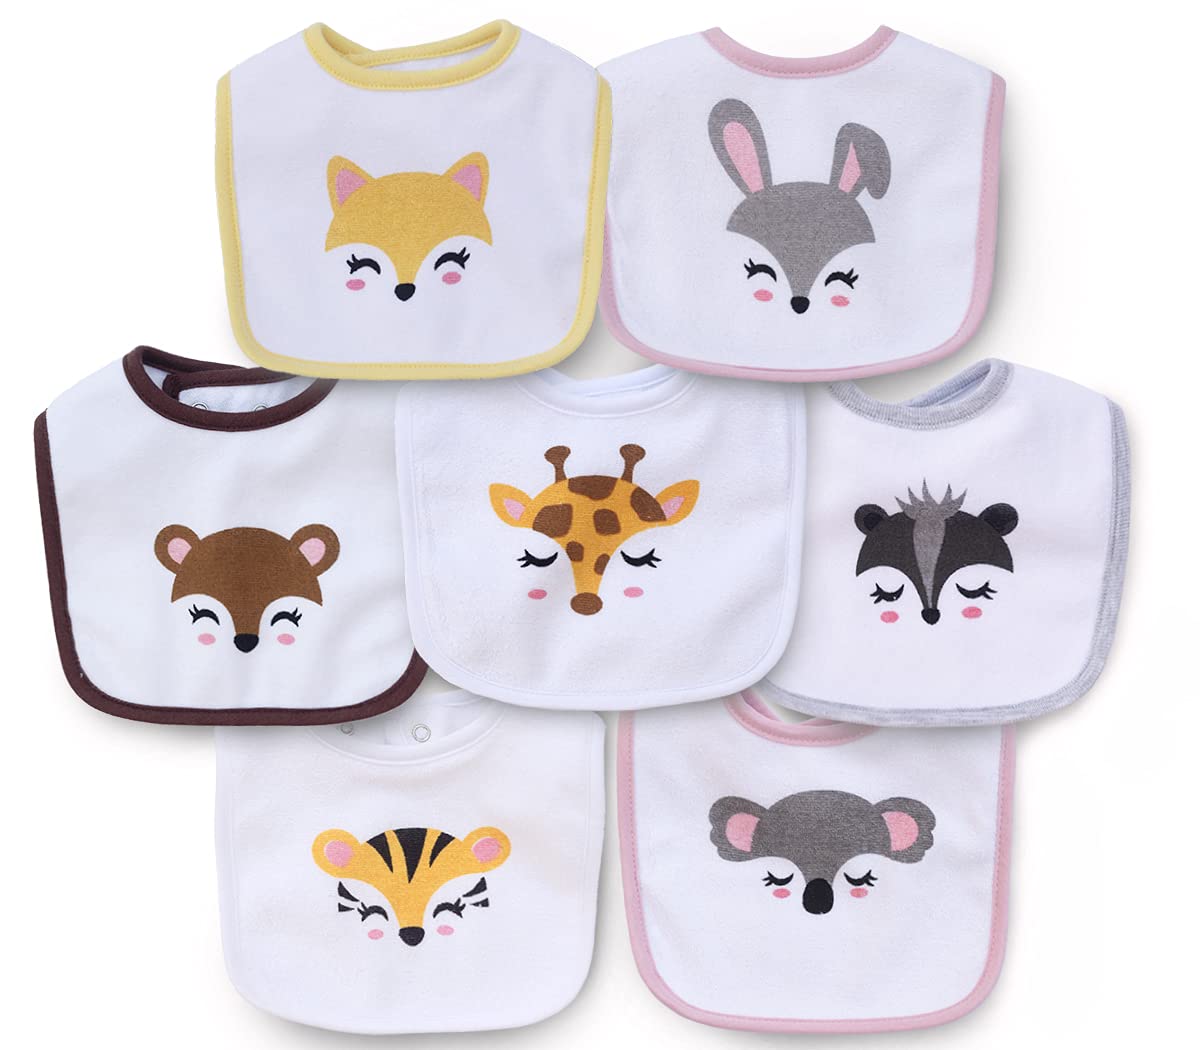 Maiwa Waterproof Terry cloth Baby bibs with Snaps for newborn girl boy, drool and teething for baby